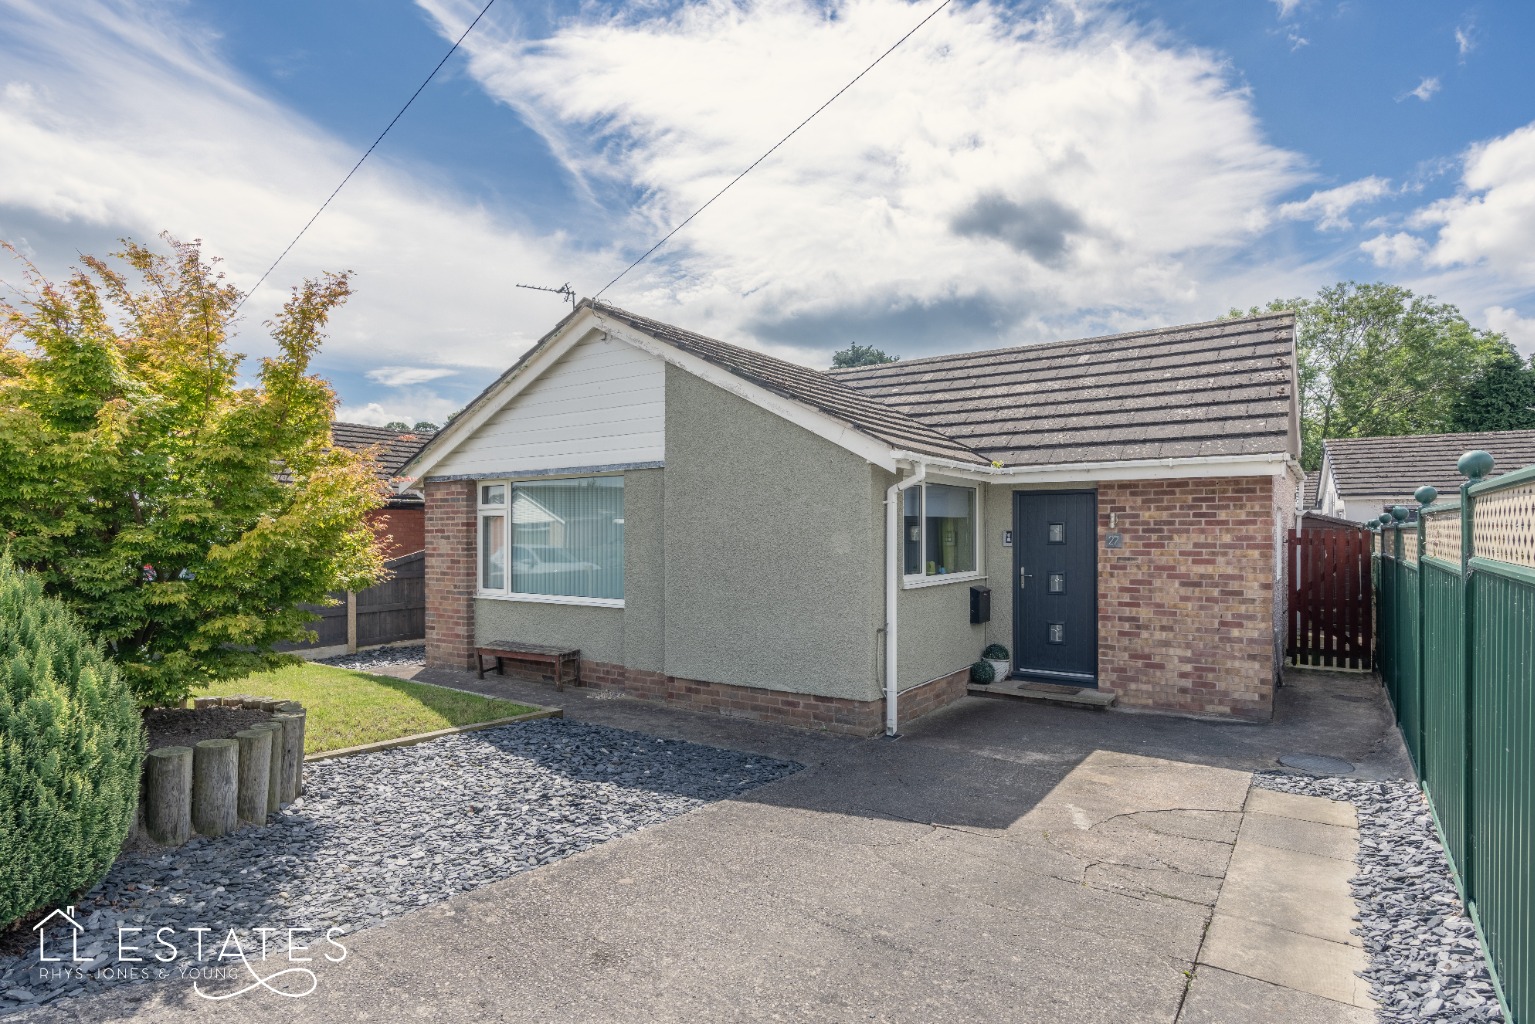 3 bed detached bungalow for sale in Ashly Court, St. Asaph - Property Image 1